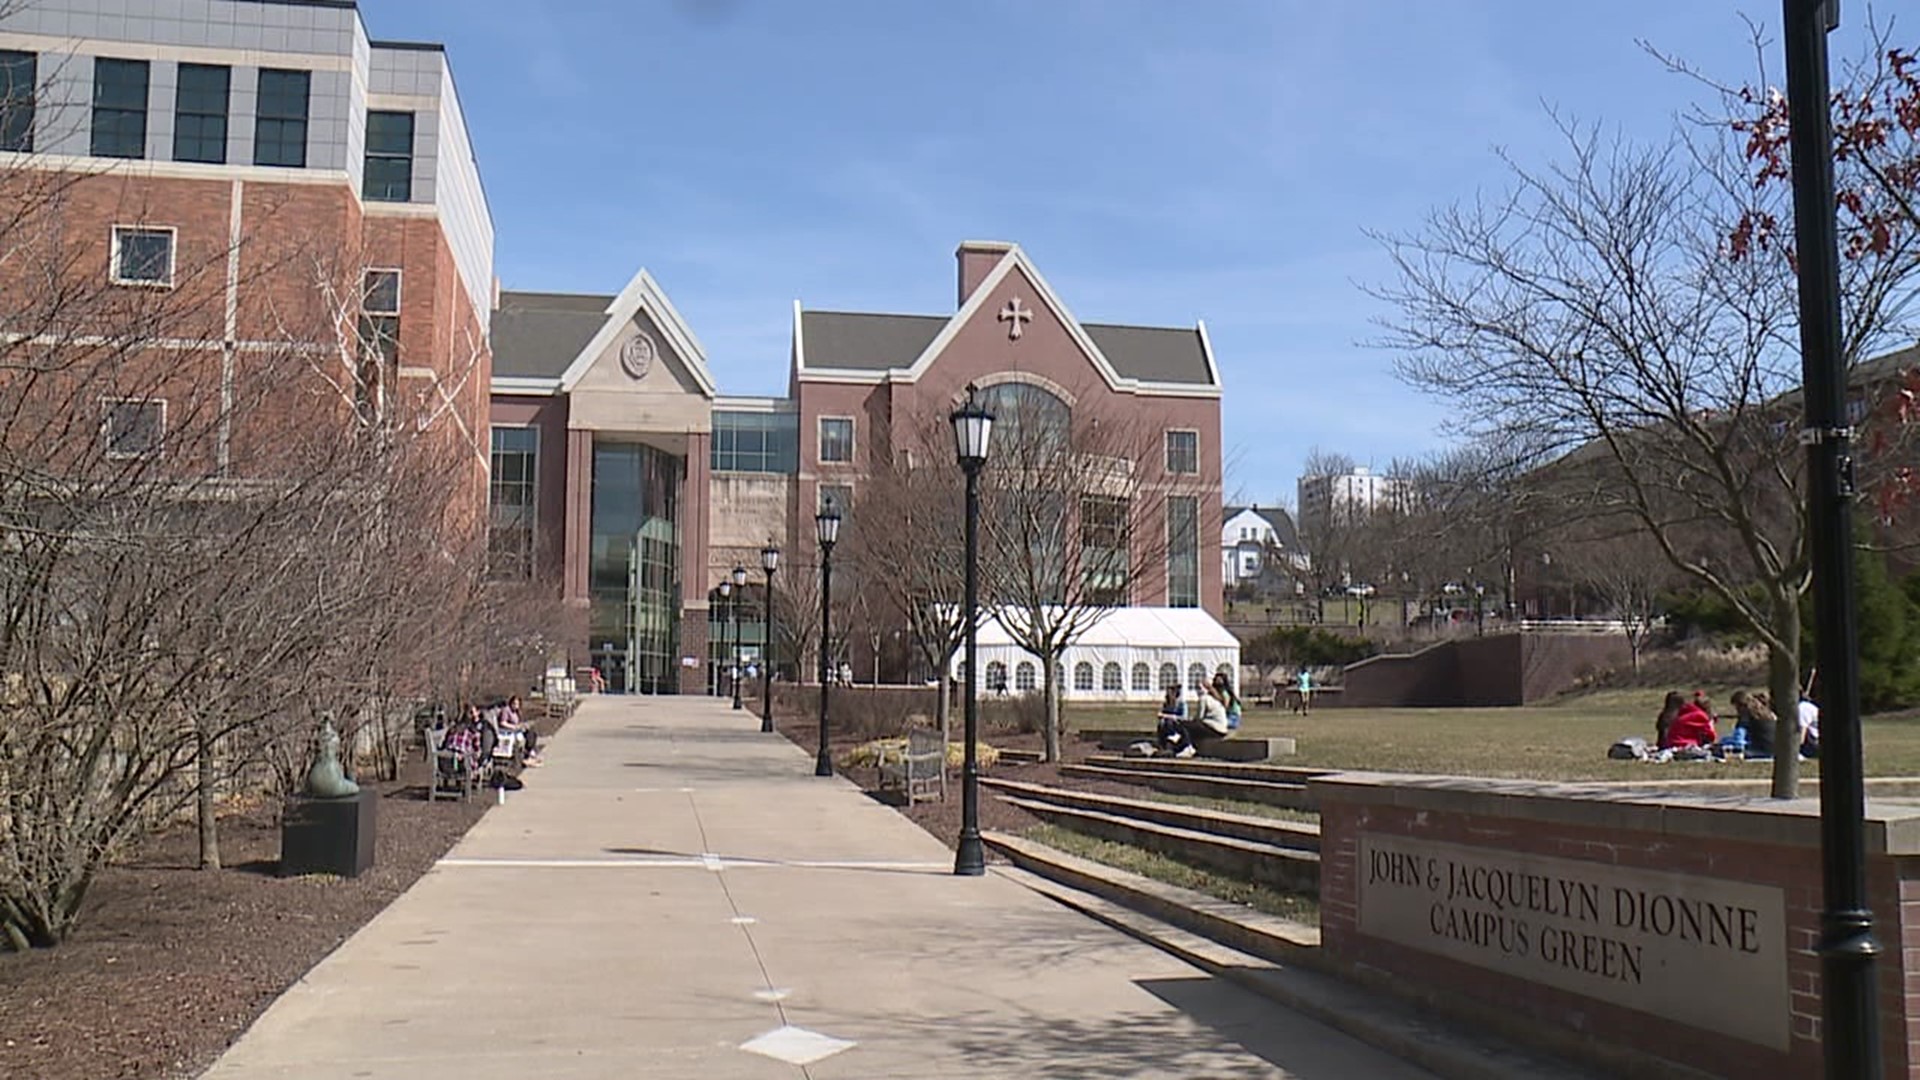 For some students, this means their senior year will be back to normal, but some of the younger students haven't had a normal educational experience in two years.